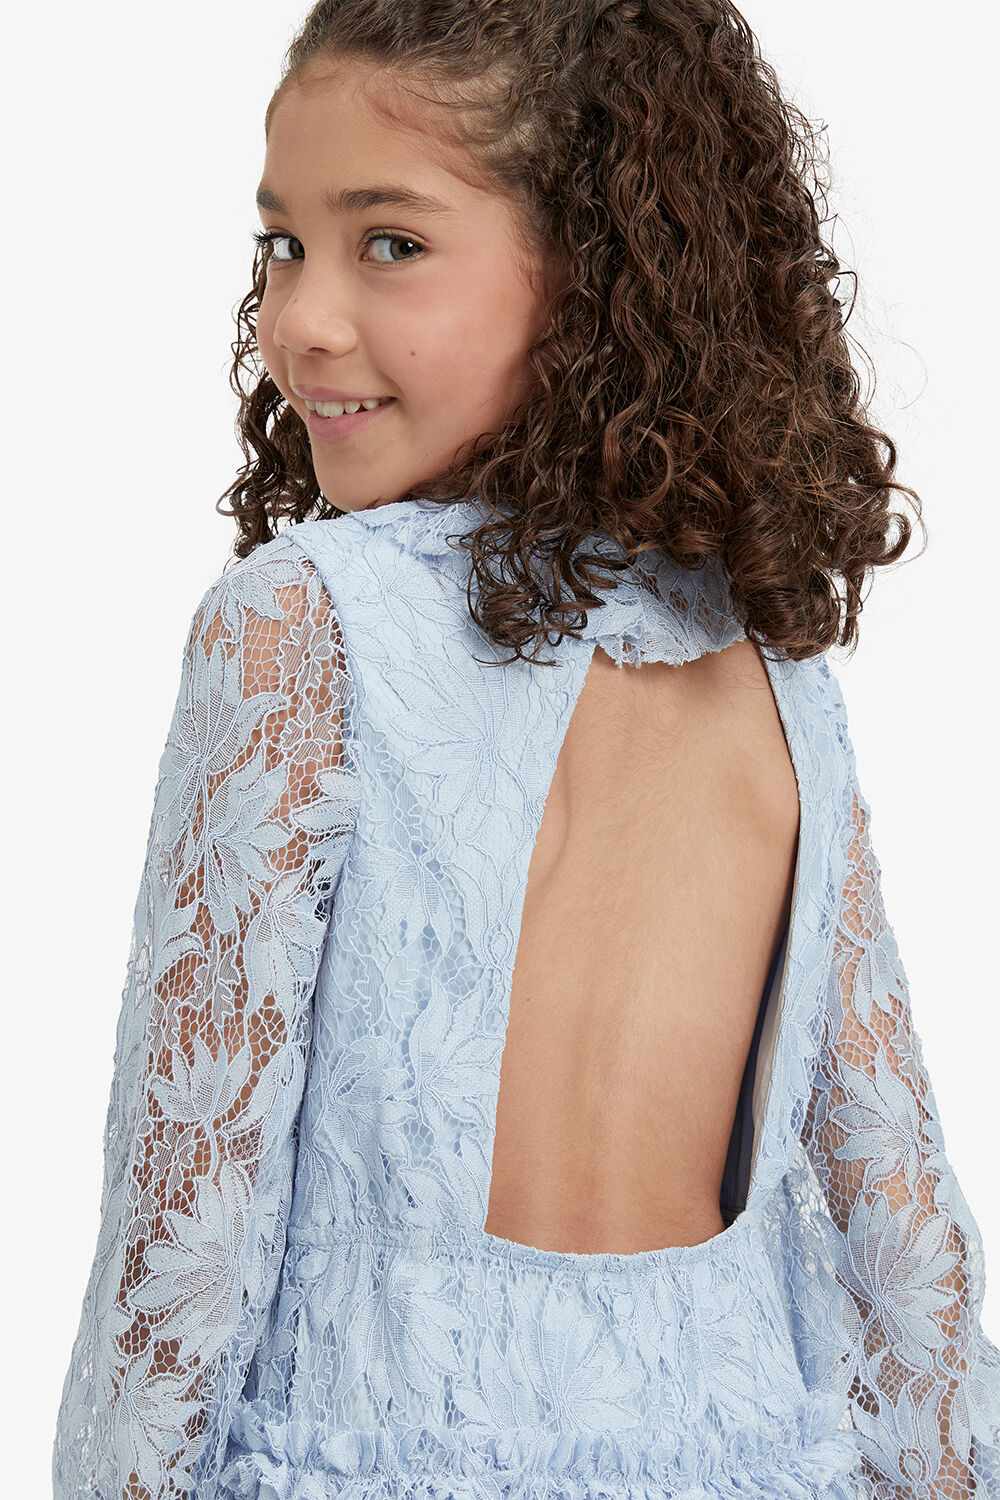 GIRLS MAGNOLIA LACE DRESS in colour CROWN BLUE